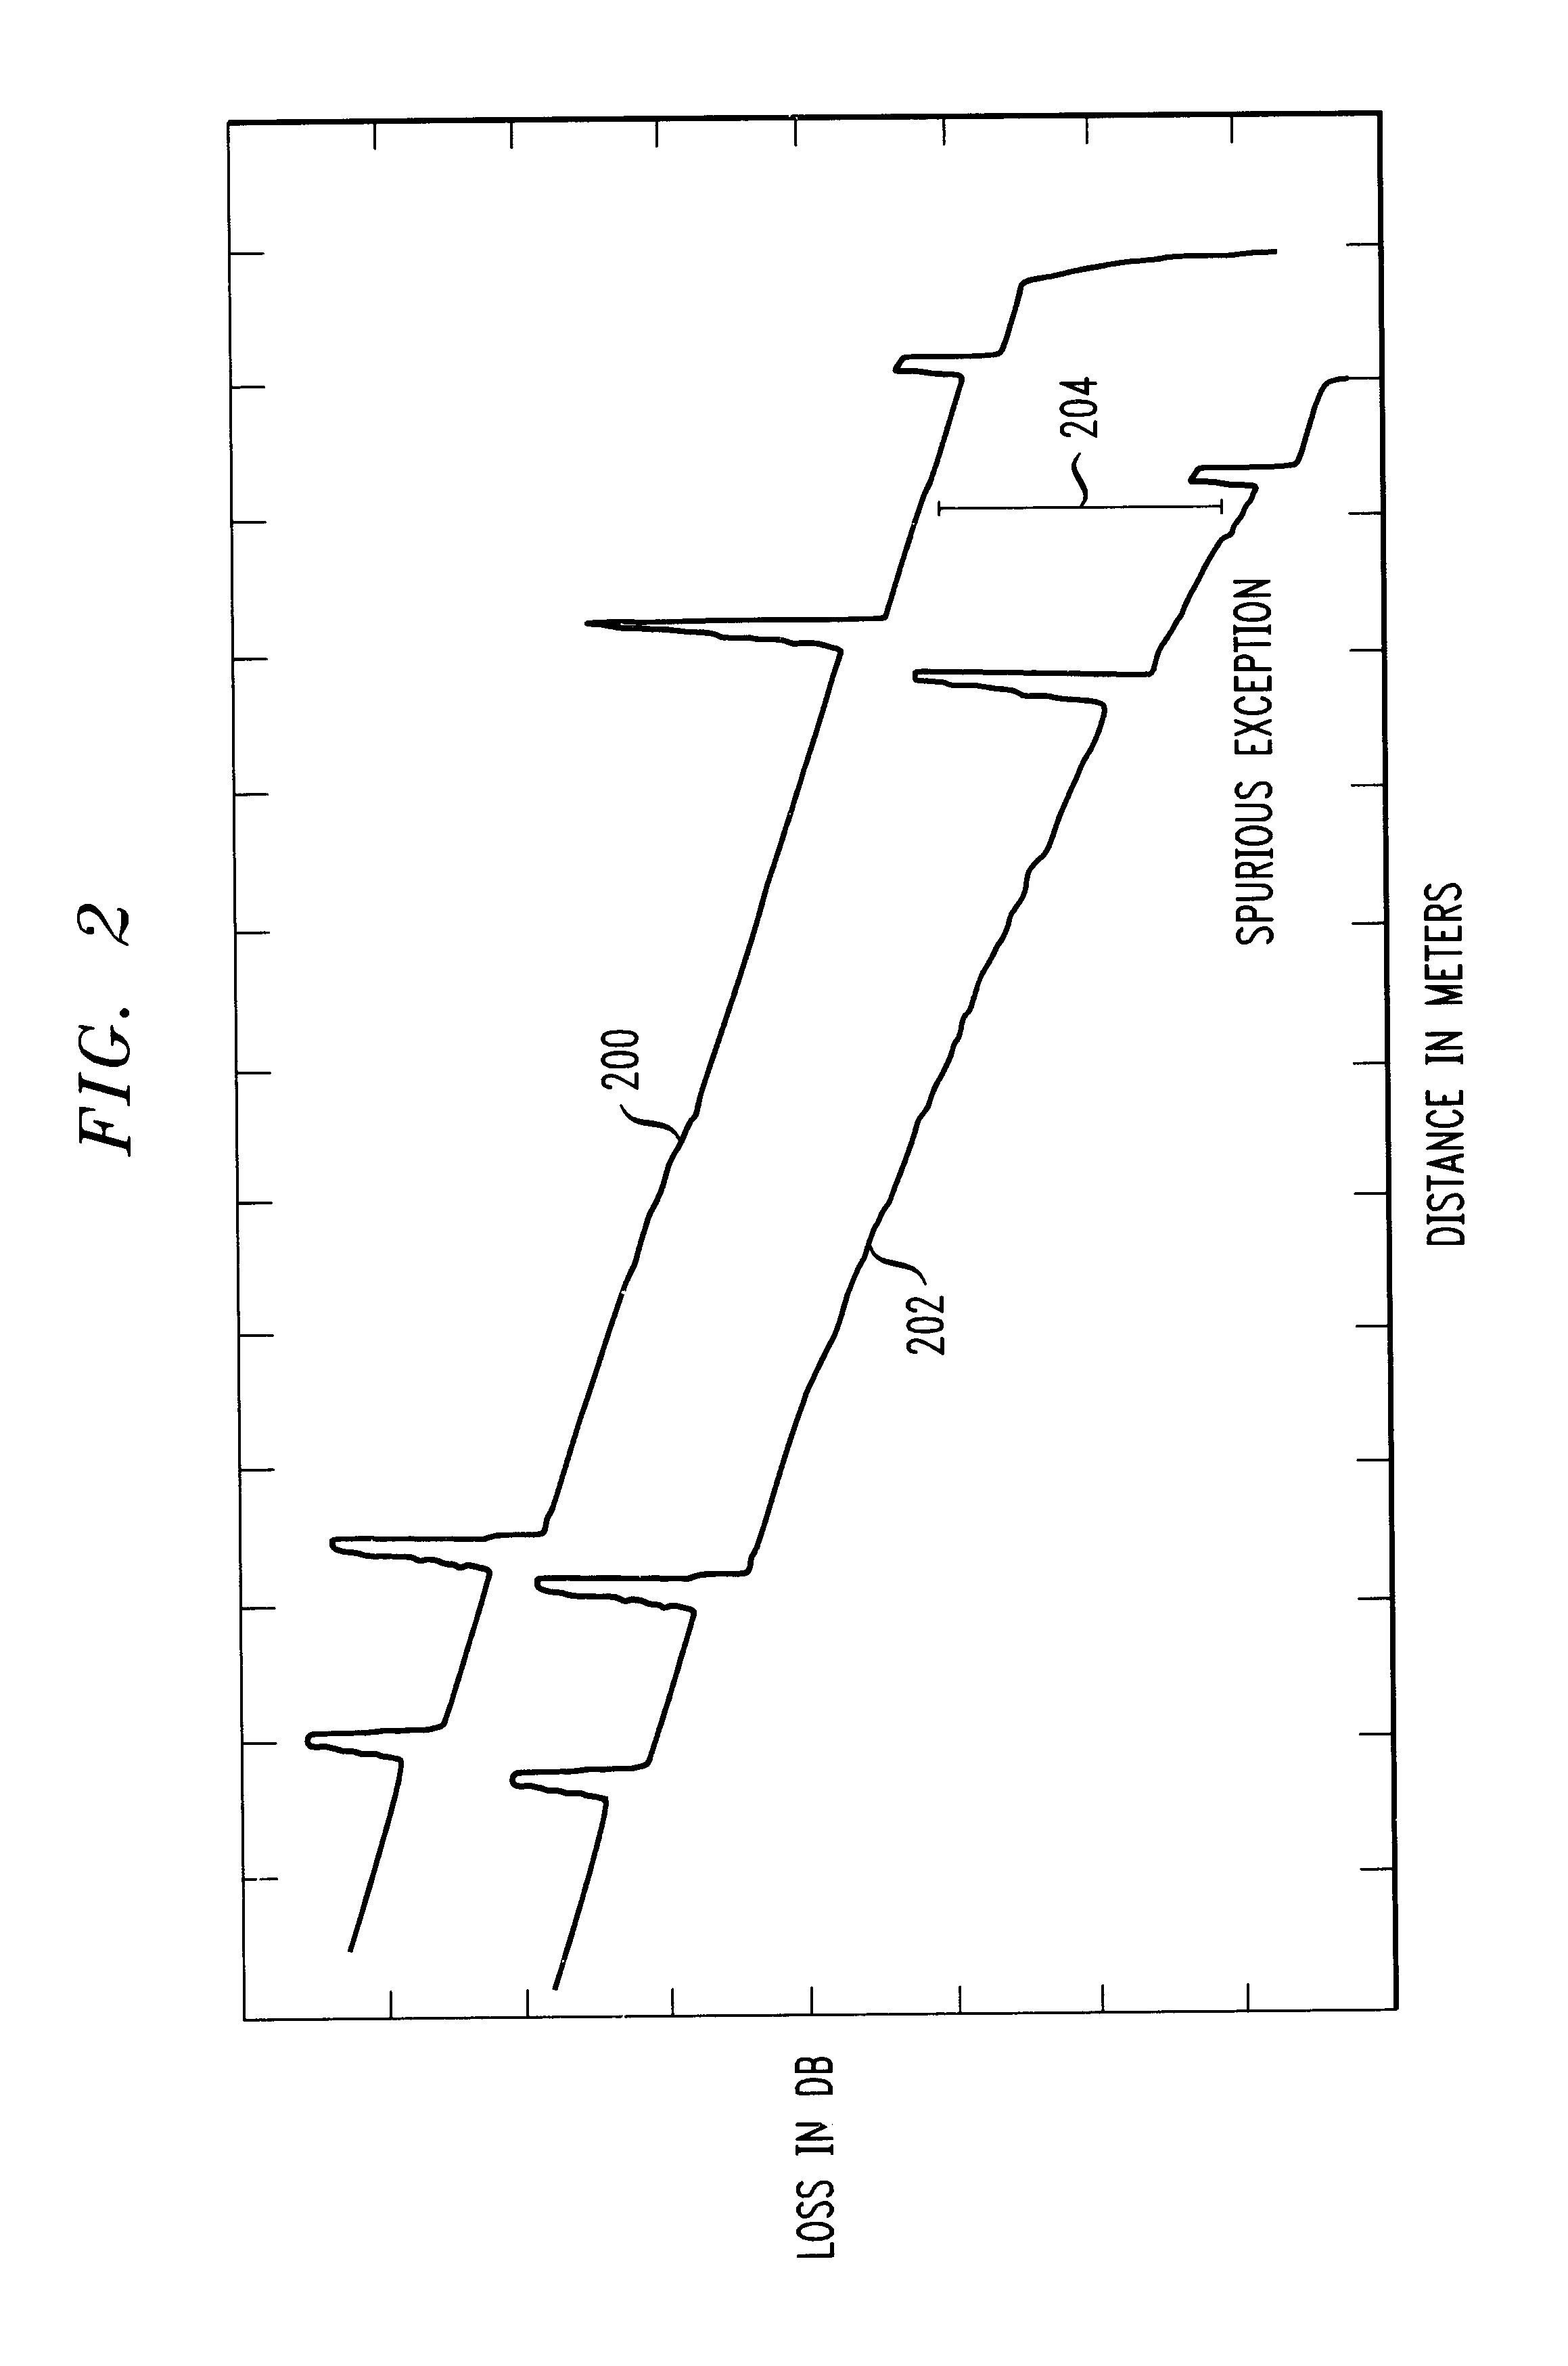 Method and apparatus for optical time domain reflectometry (OTDR) analysis